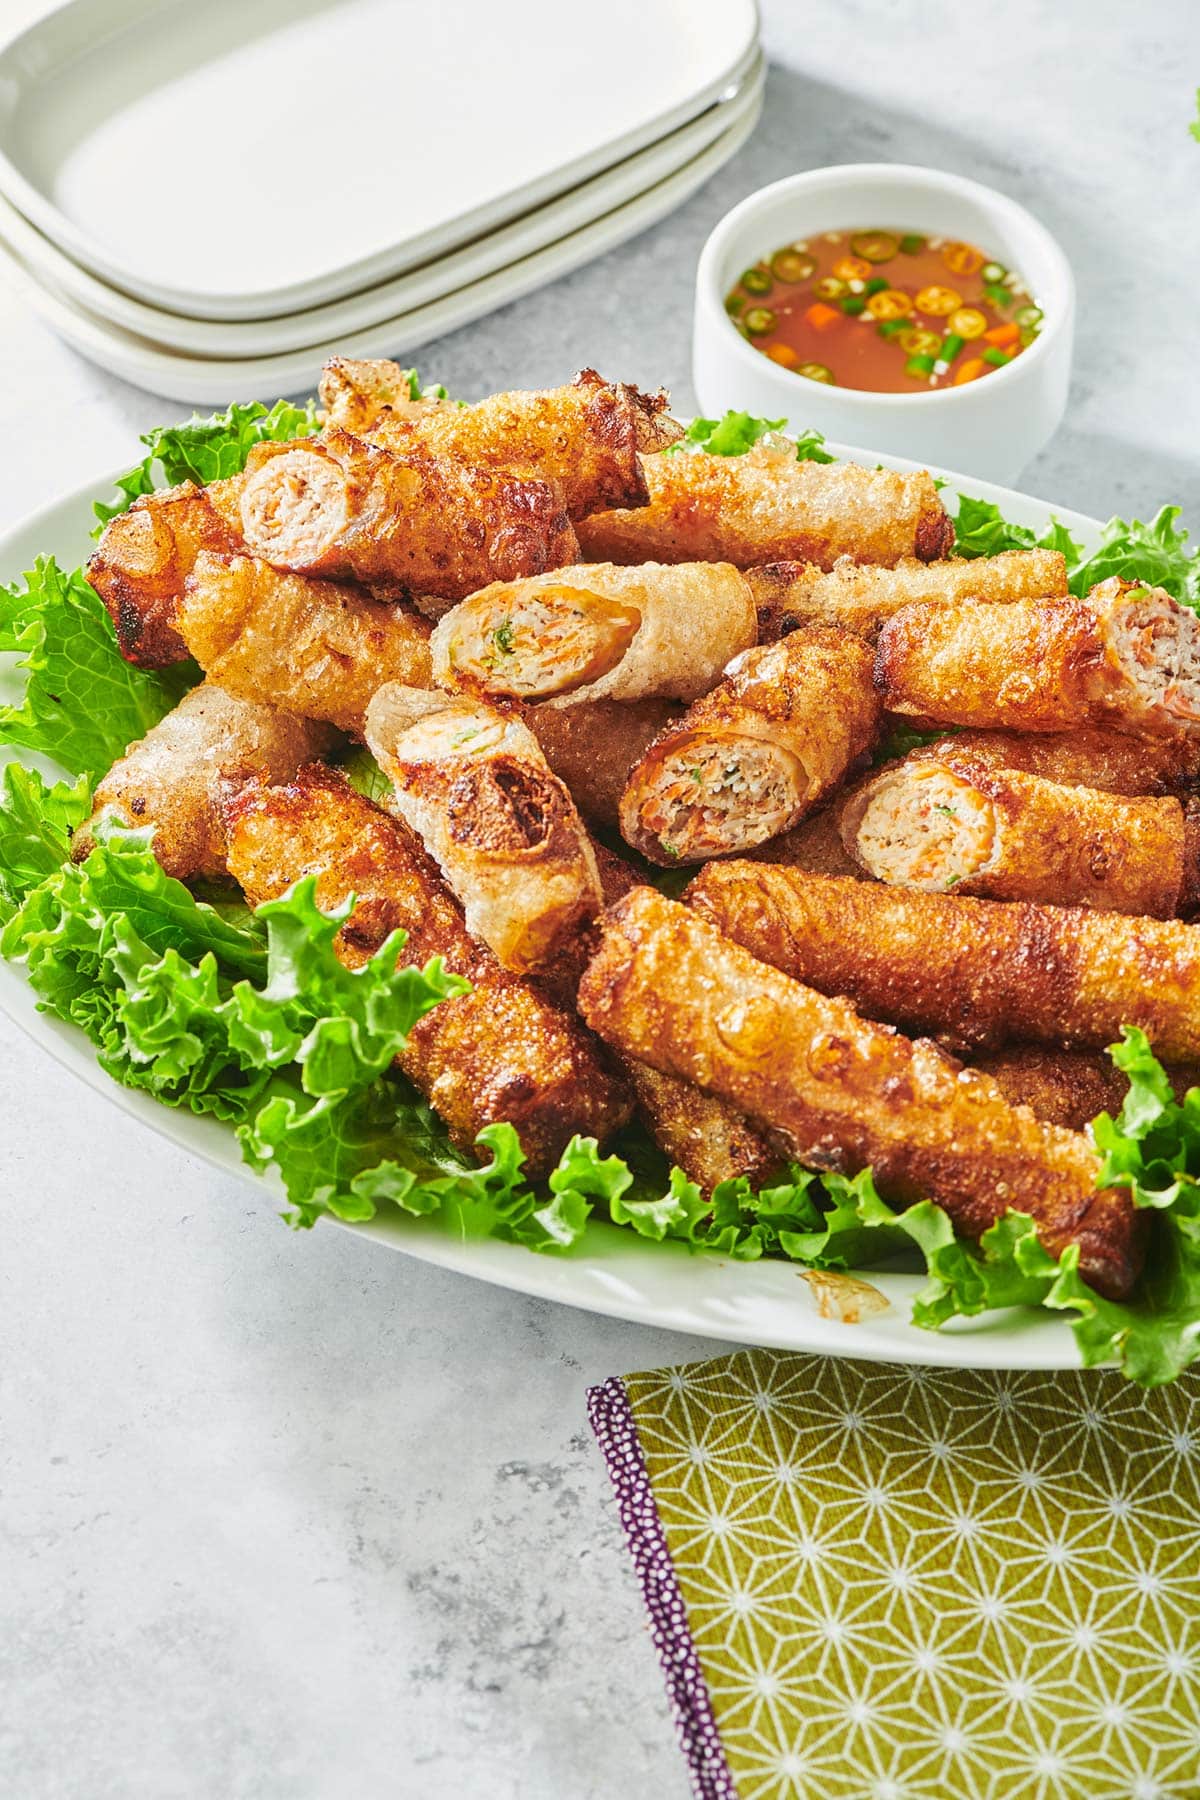 Platter of Vietnamese Spring Rolls on lettuce with dipping sauce.